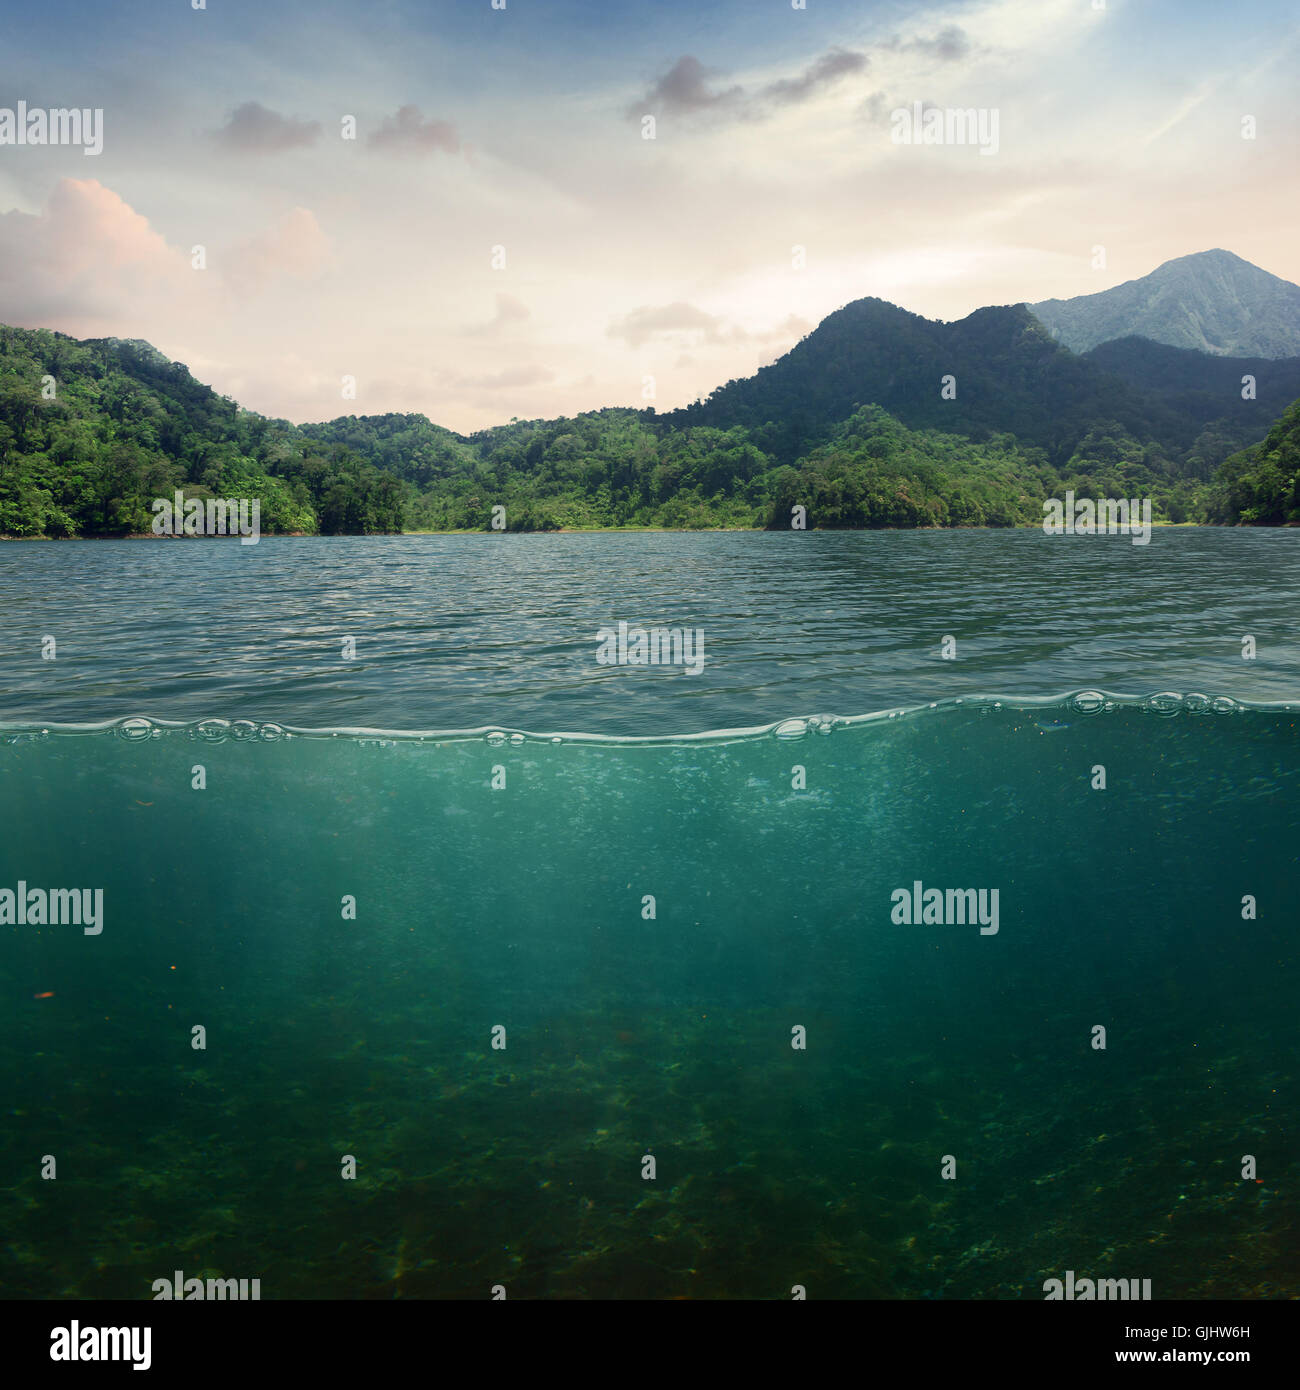 Sea landscape design template with underwater part and coast mountain splitted by waterline Stock Photo